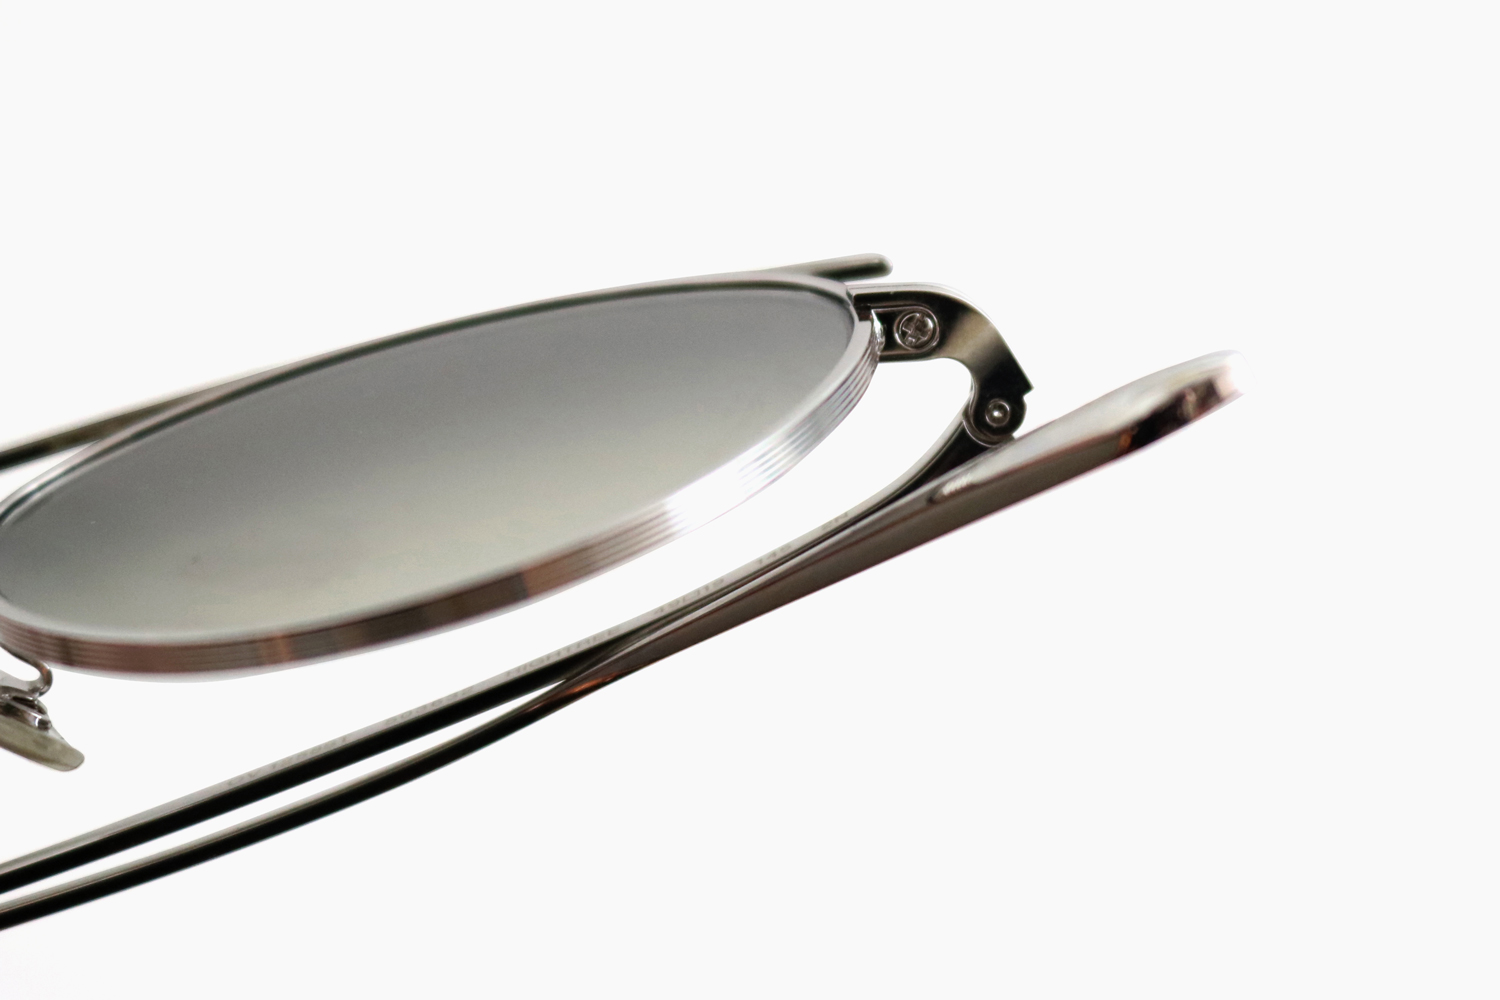 OLIVER PEOPLES THE ROW｜HIGHTREE OV1258ST - 503632｜OLIVER PEOPLES